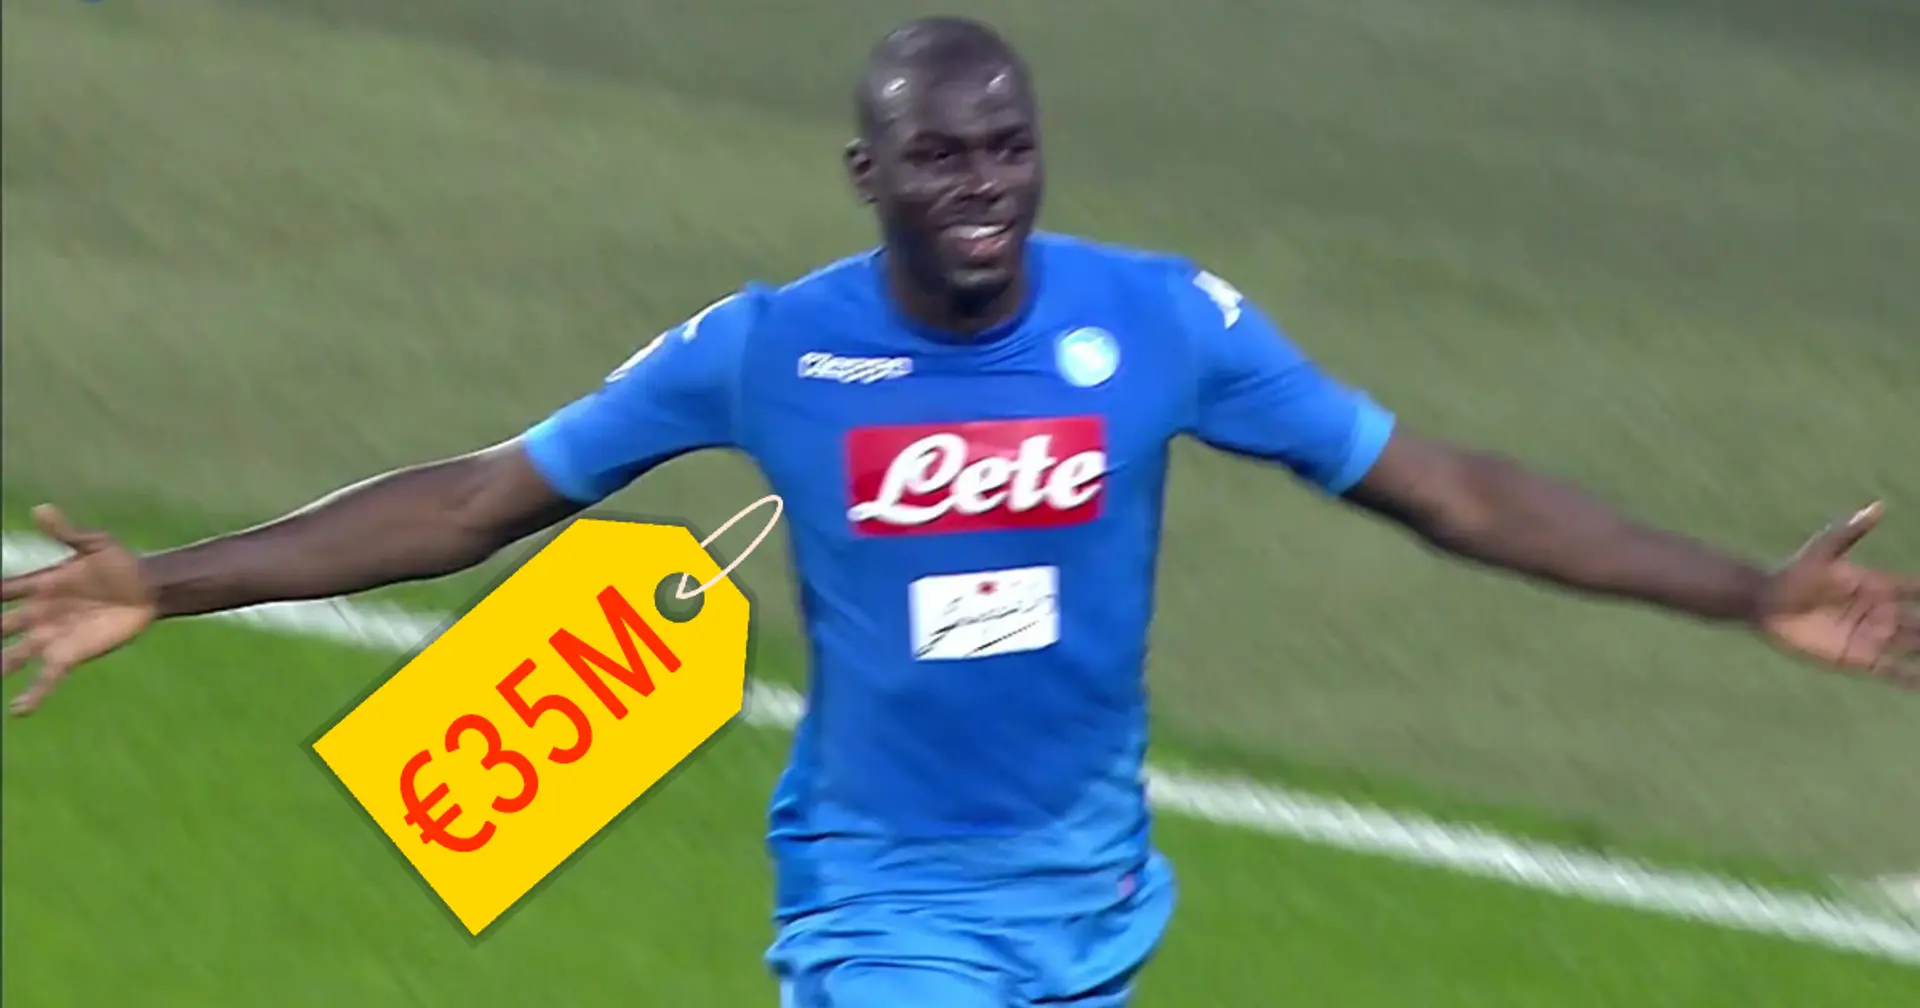 Napoli want €35m for Koulibaly, Barca could include one player in swap deal (reliability: 4 stars)